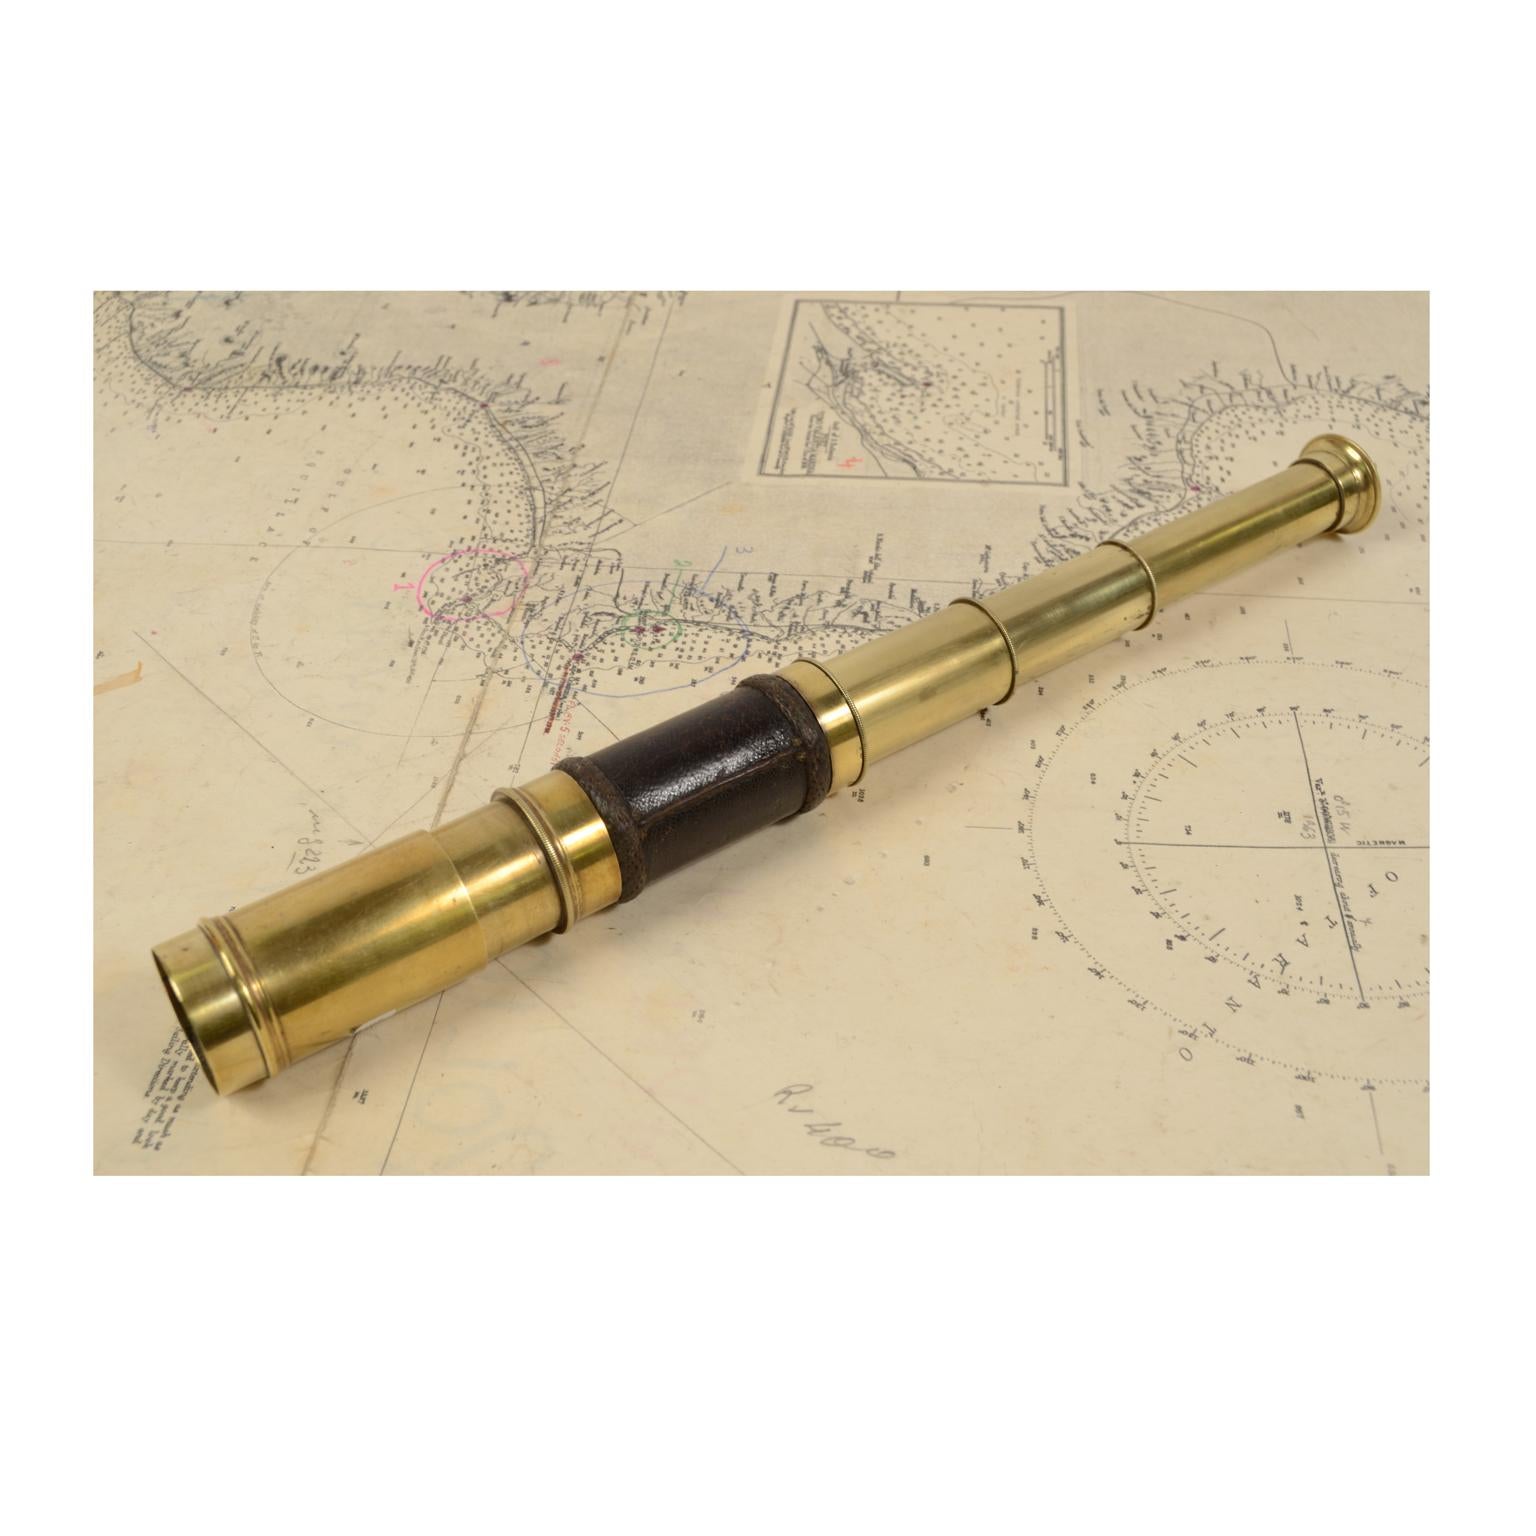 Brass telescope with leather-covered handle, focusing on three extensions, complete with dust protection tab and sunshade extension. Maximum length 45 cm, minimum 14 cm, focal diameter 2.5 cm. Complete with base for support made to measure of wood